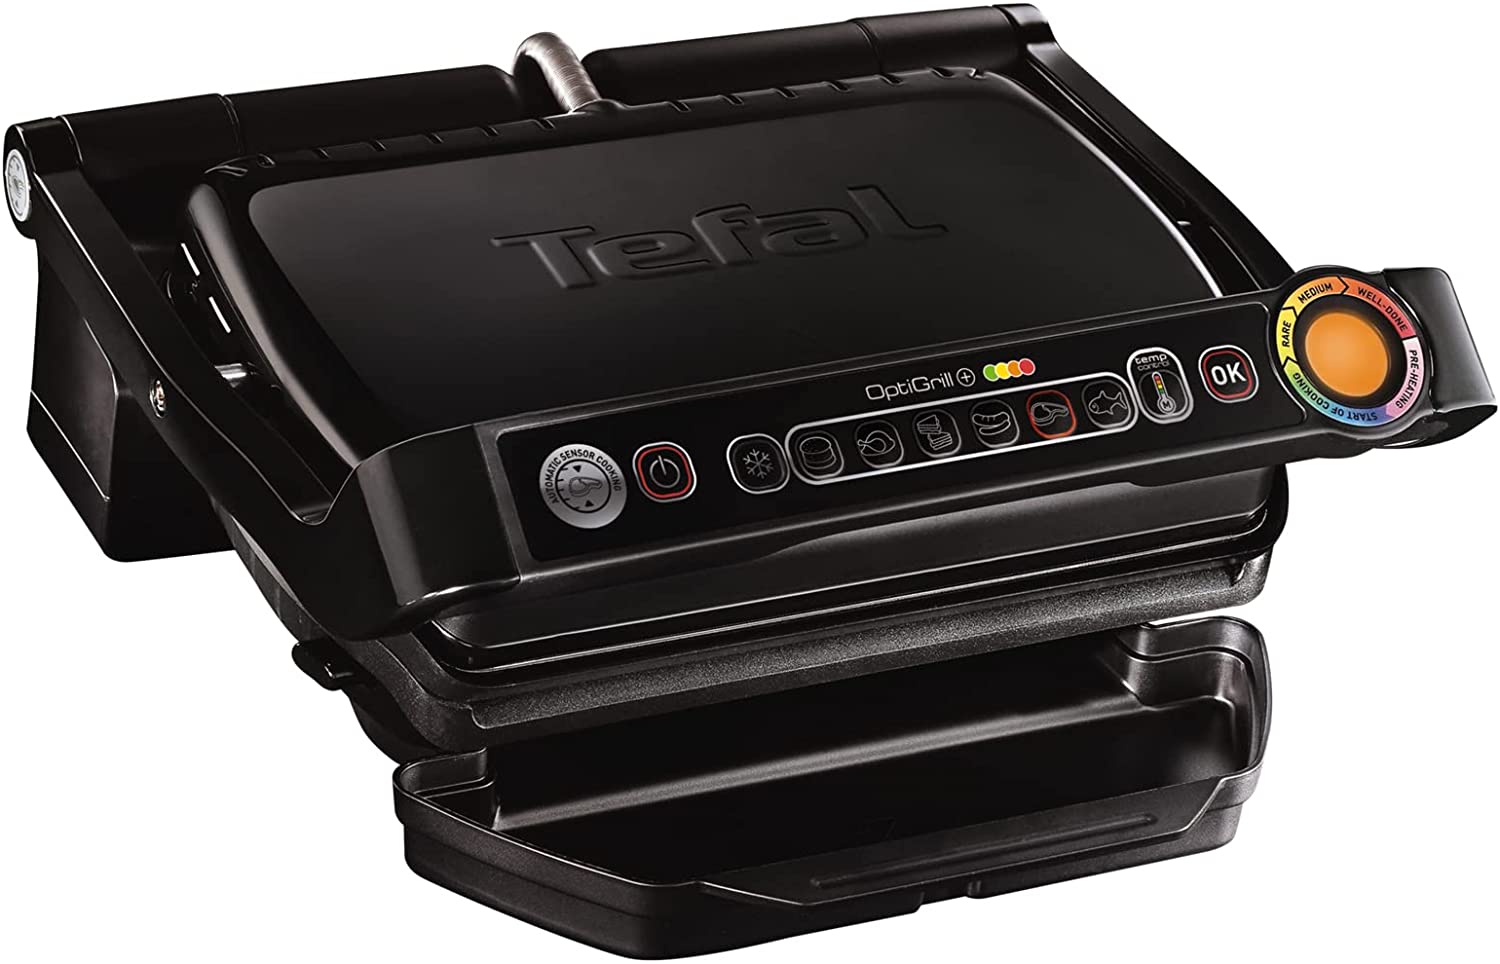 Tefal GC 7148 Grill, 18/8 Stainless Steel